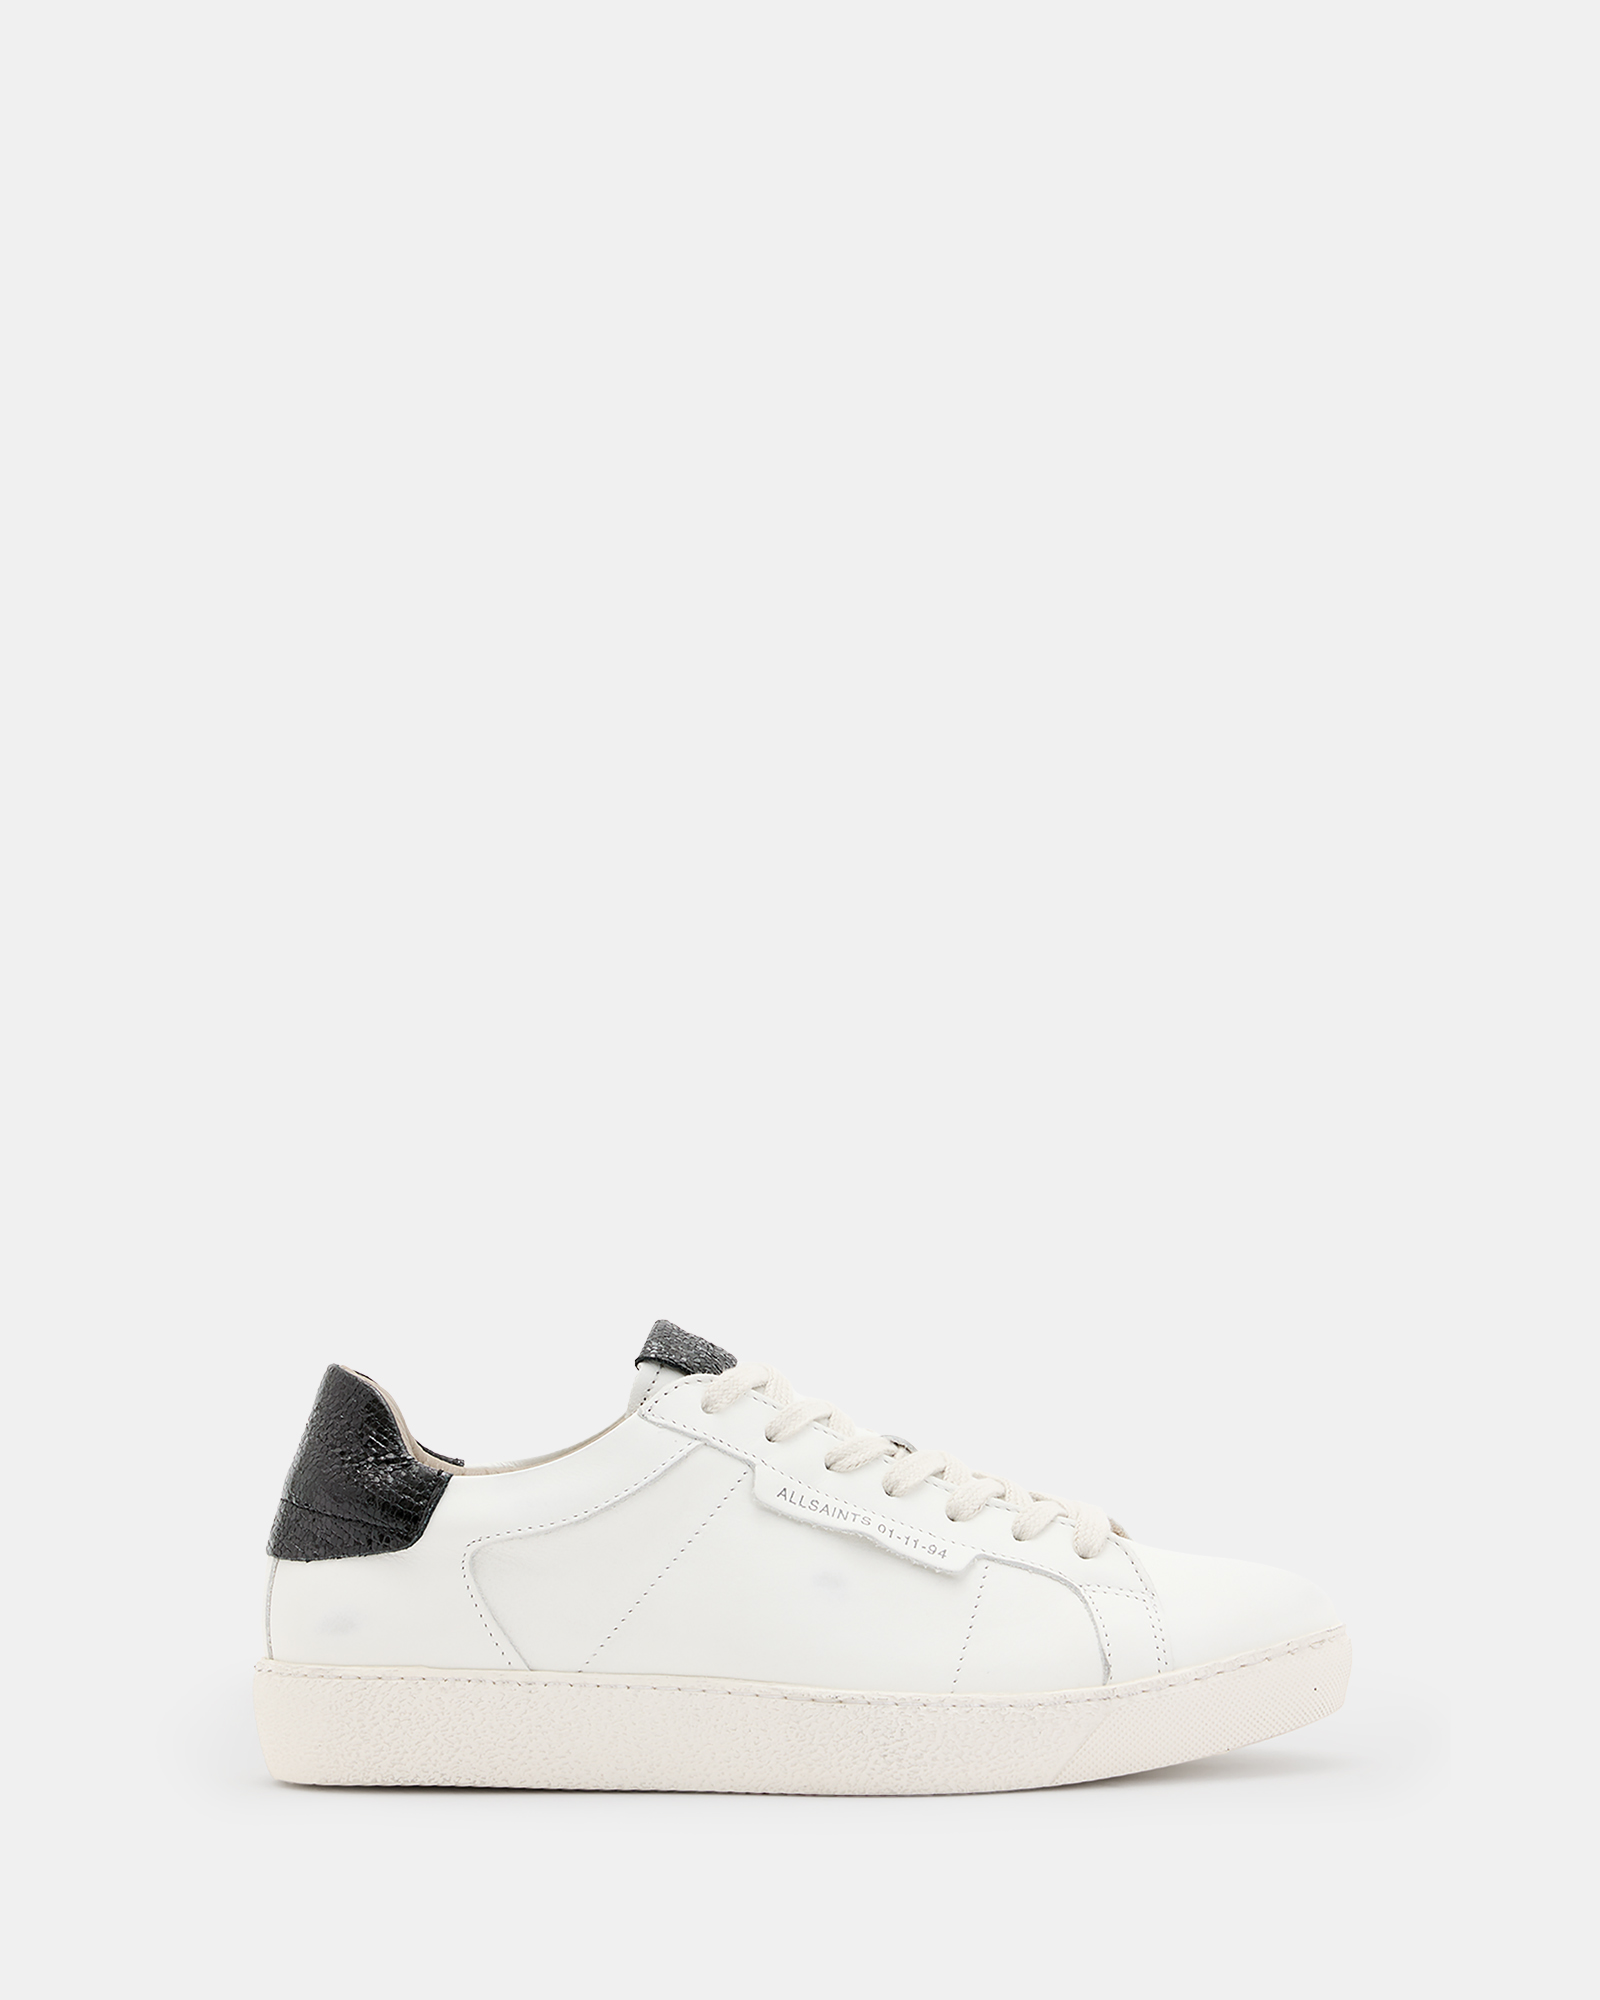 AllSaints Sheer Round Toe Leather Sneakers